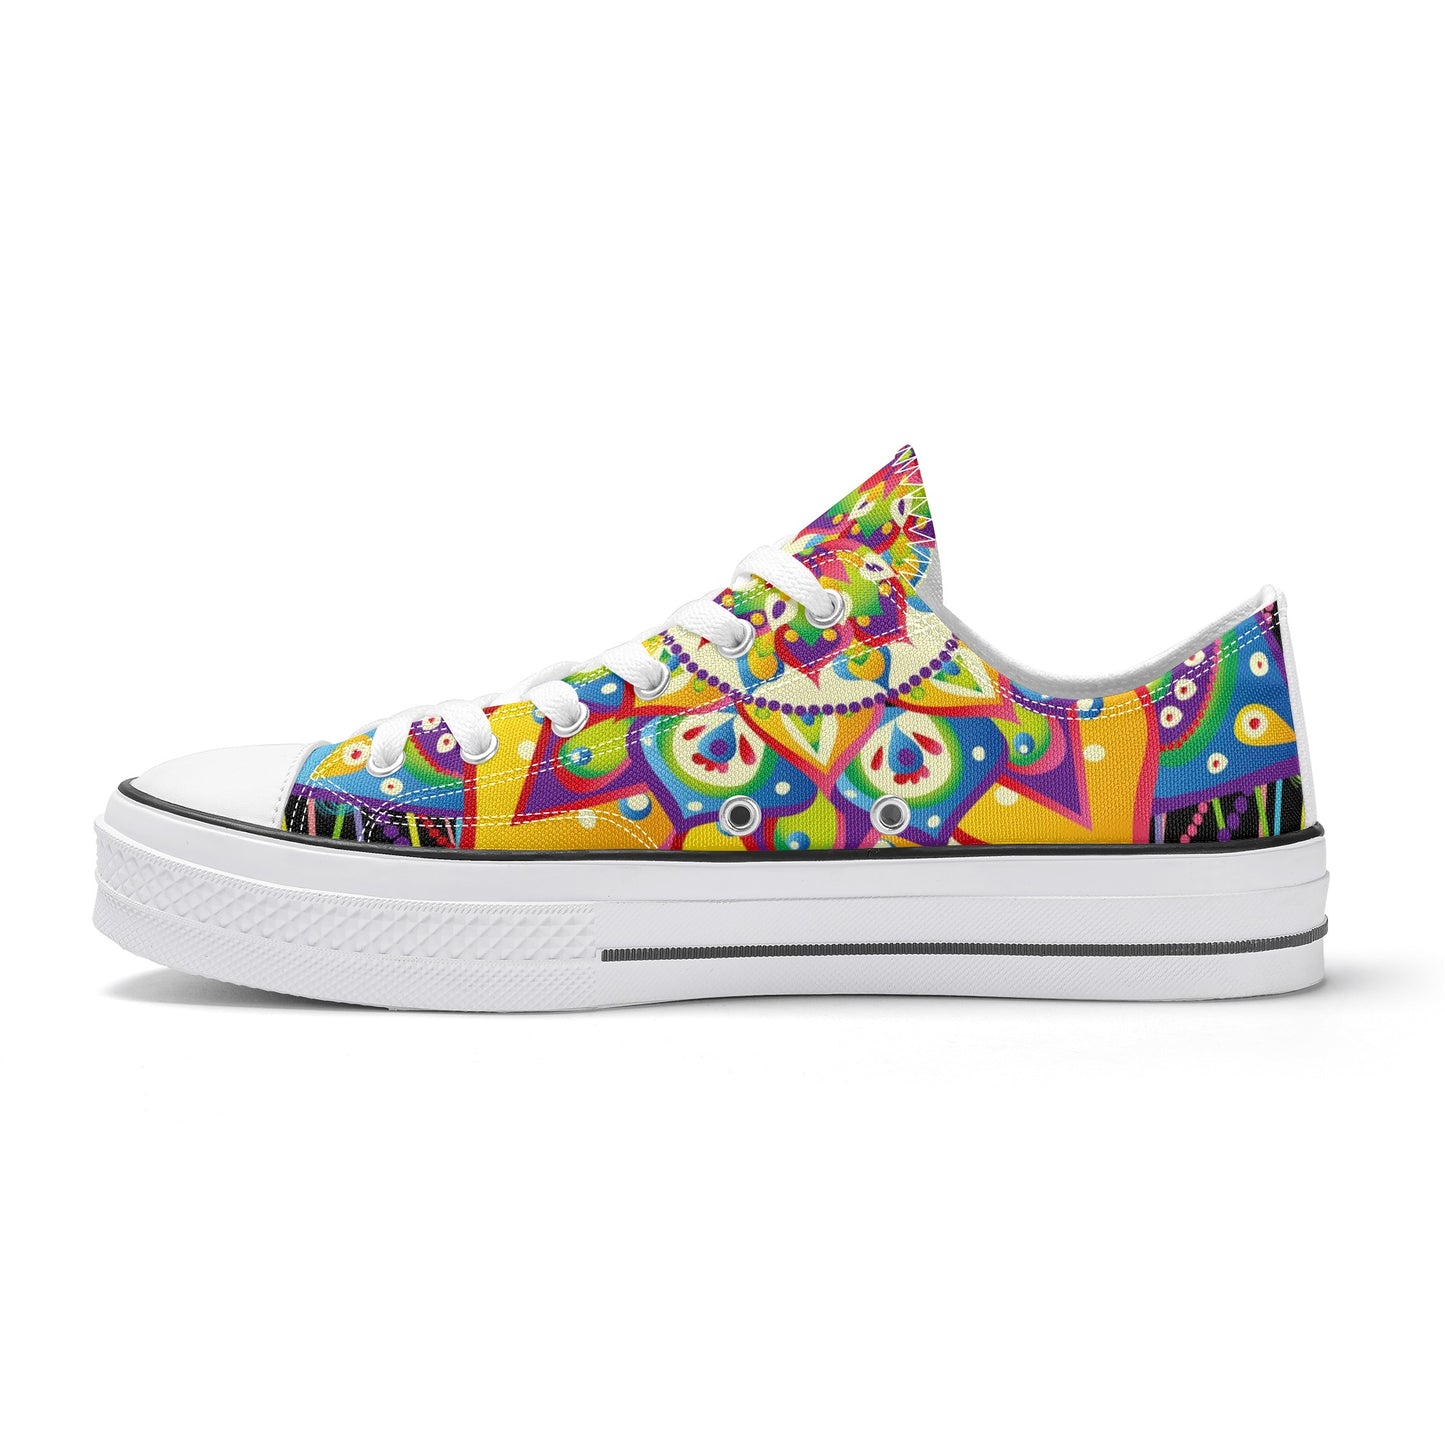 Mandala Pattern - Mens Classic Low Top Canvas Shoes for Footwear Lovers